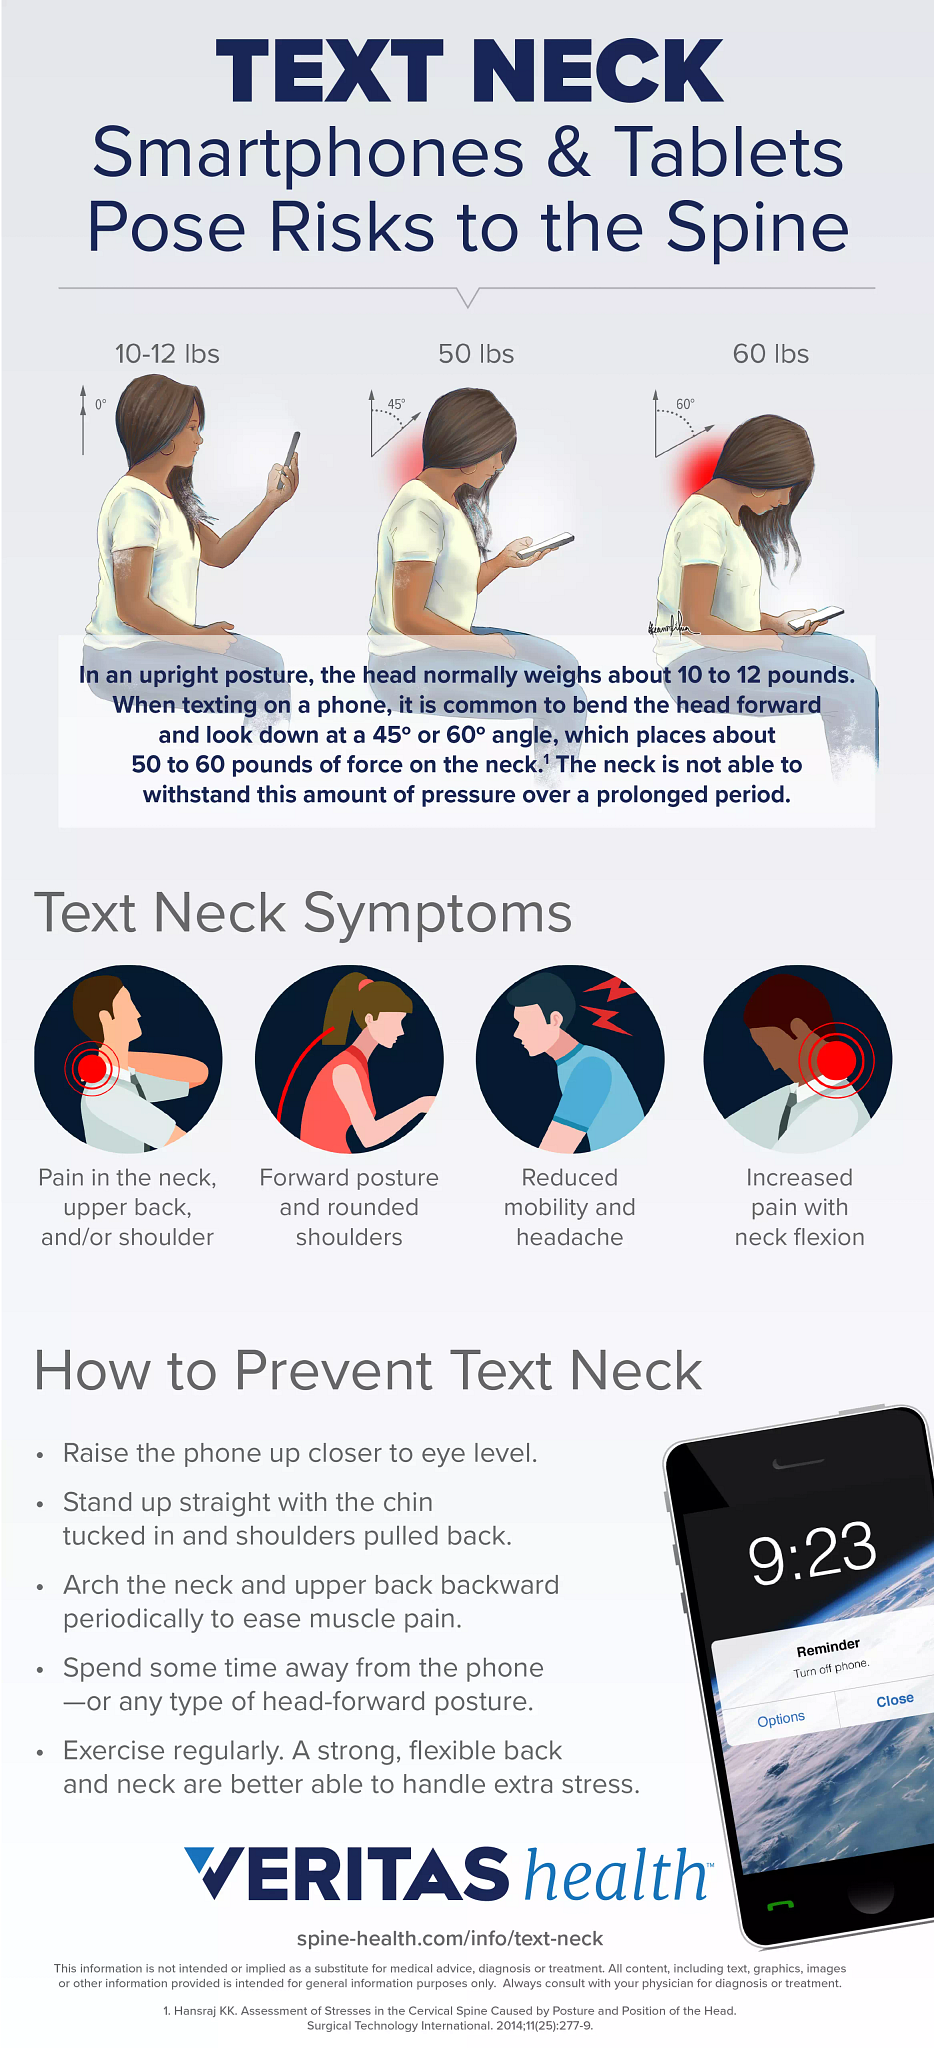 What are 4 symptoms of text neck?